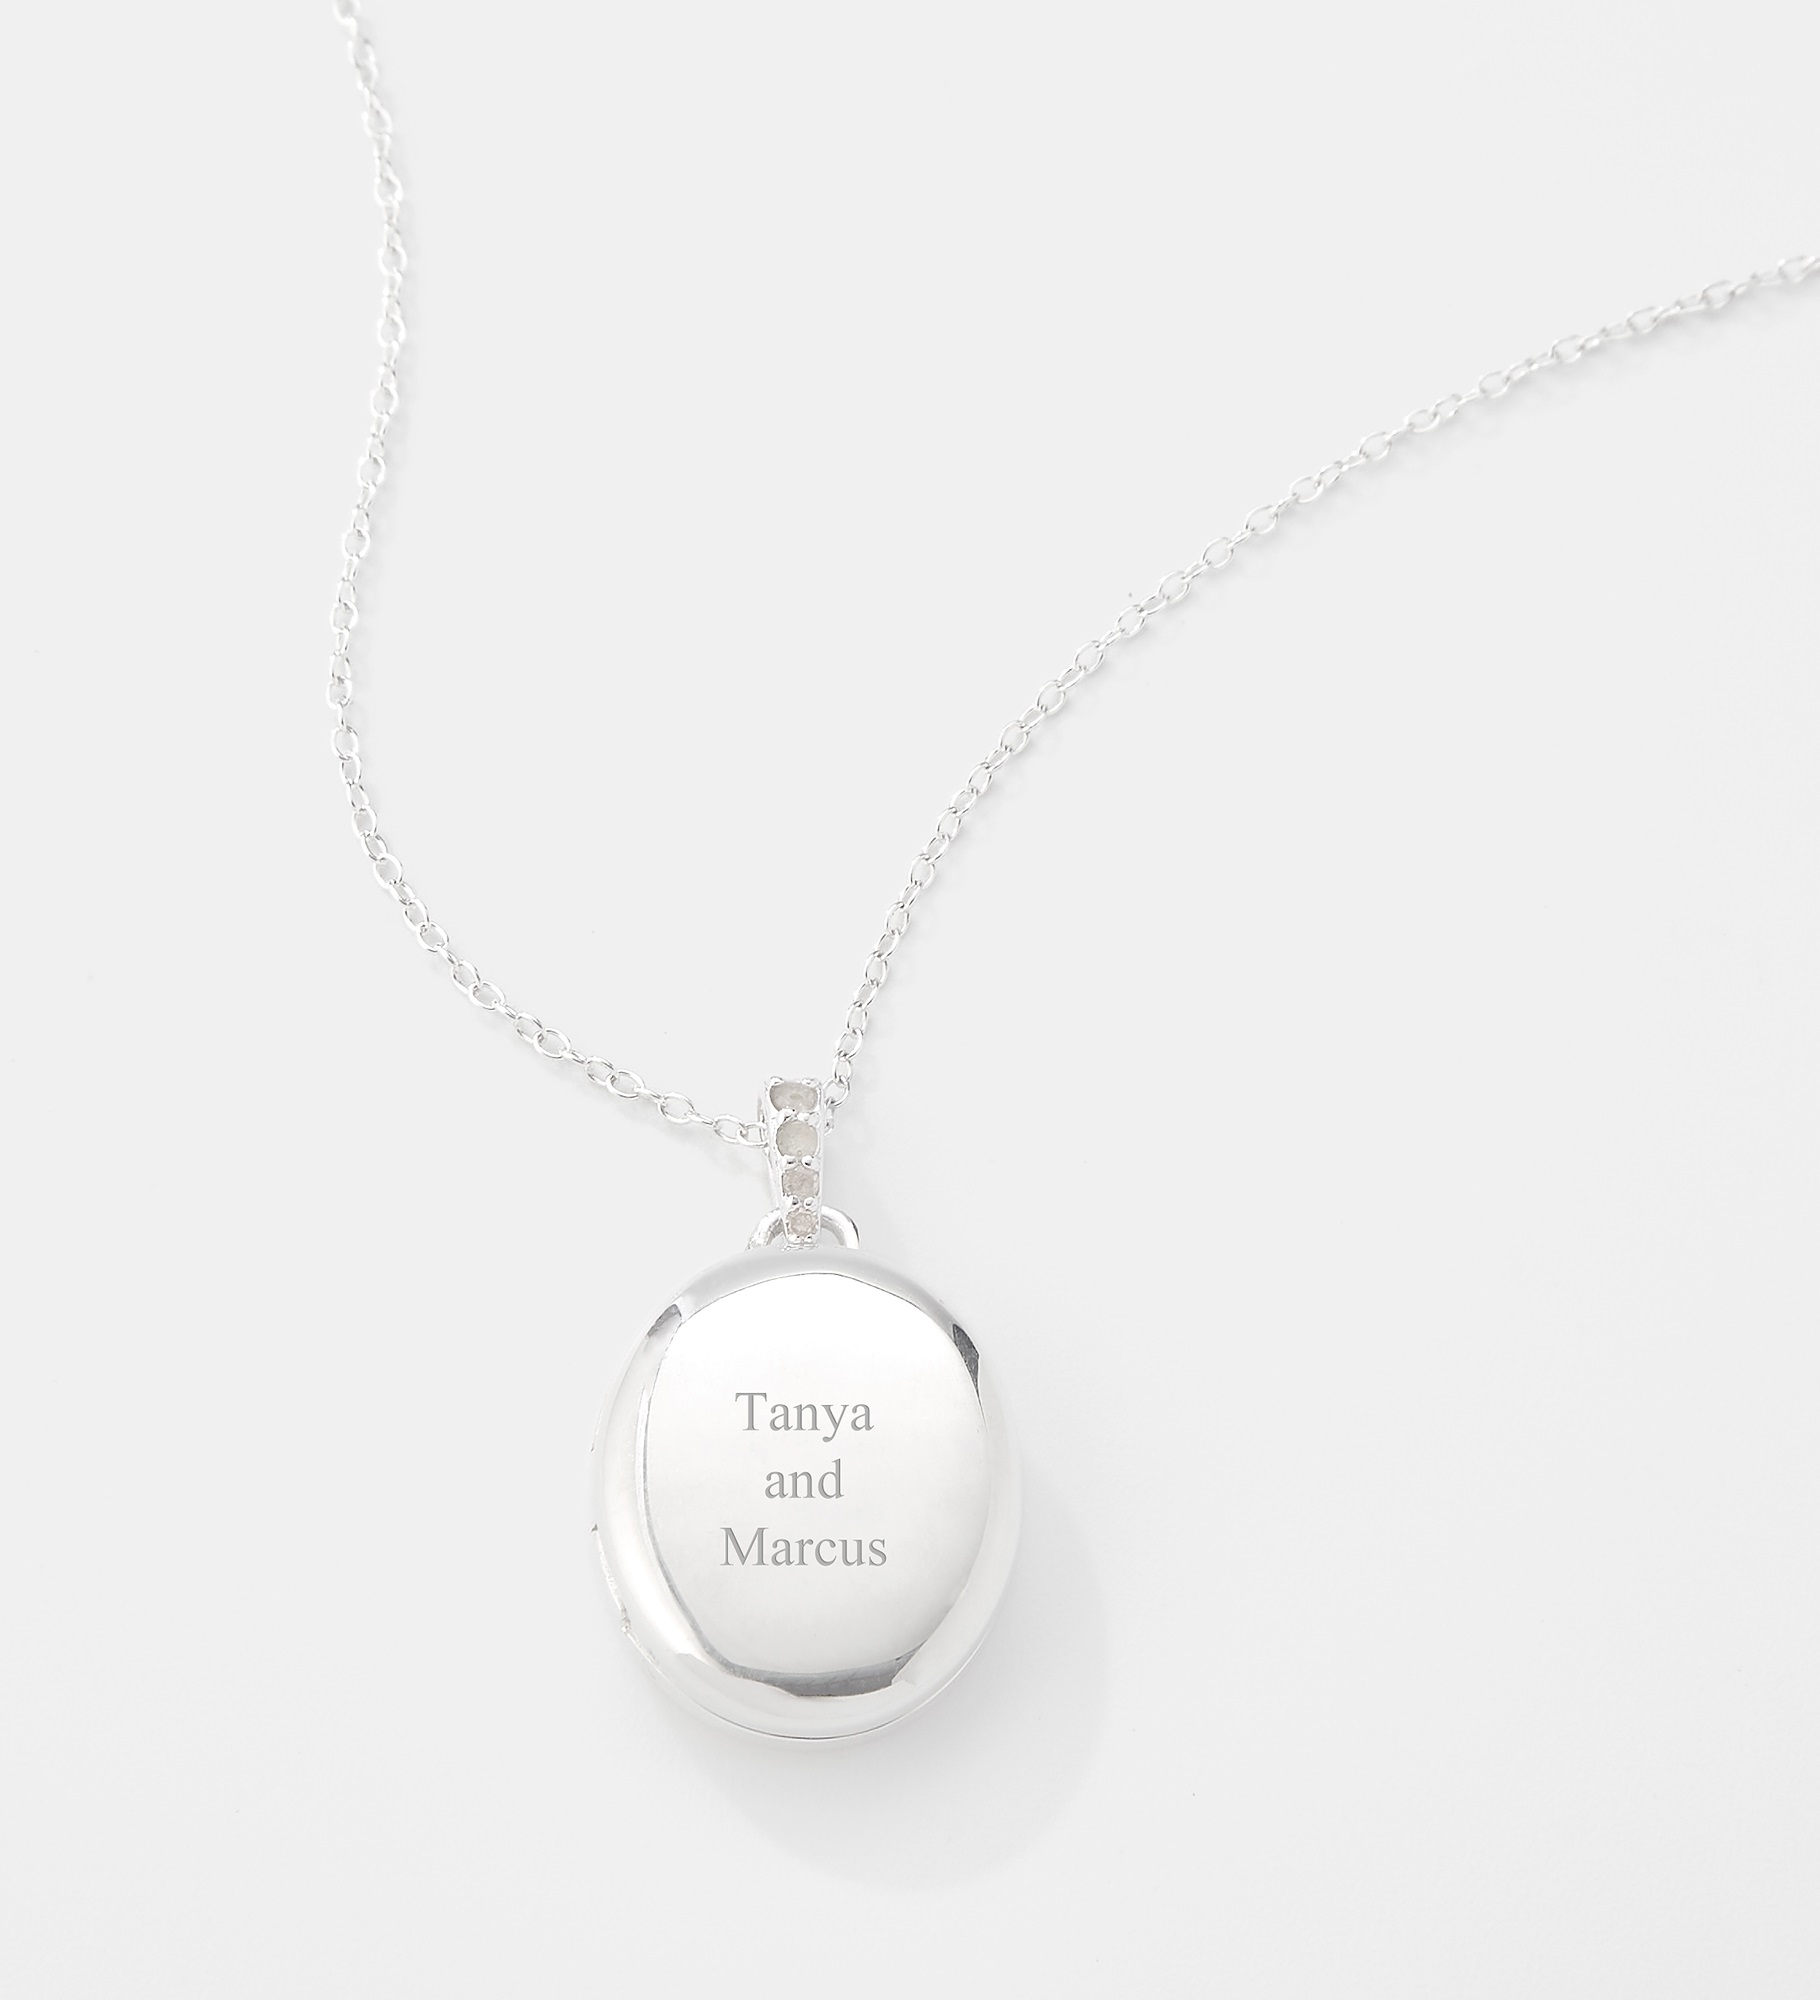  Engraved Sterling Silver Oval Locket with Diamonds Necklace